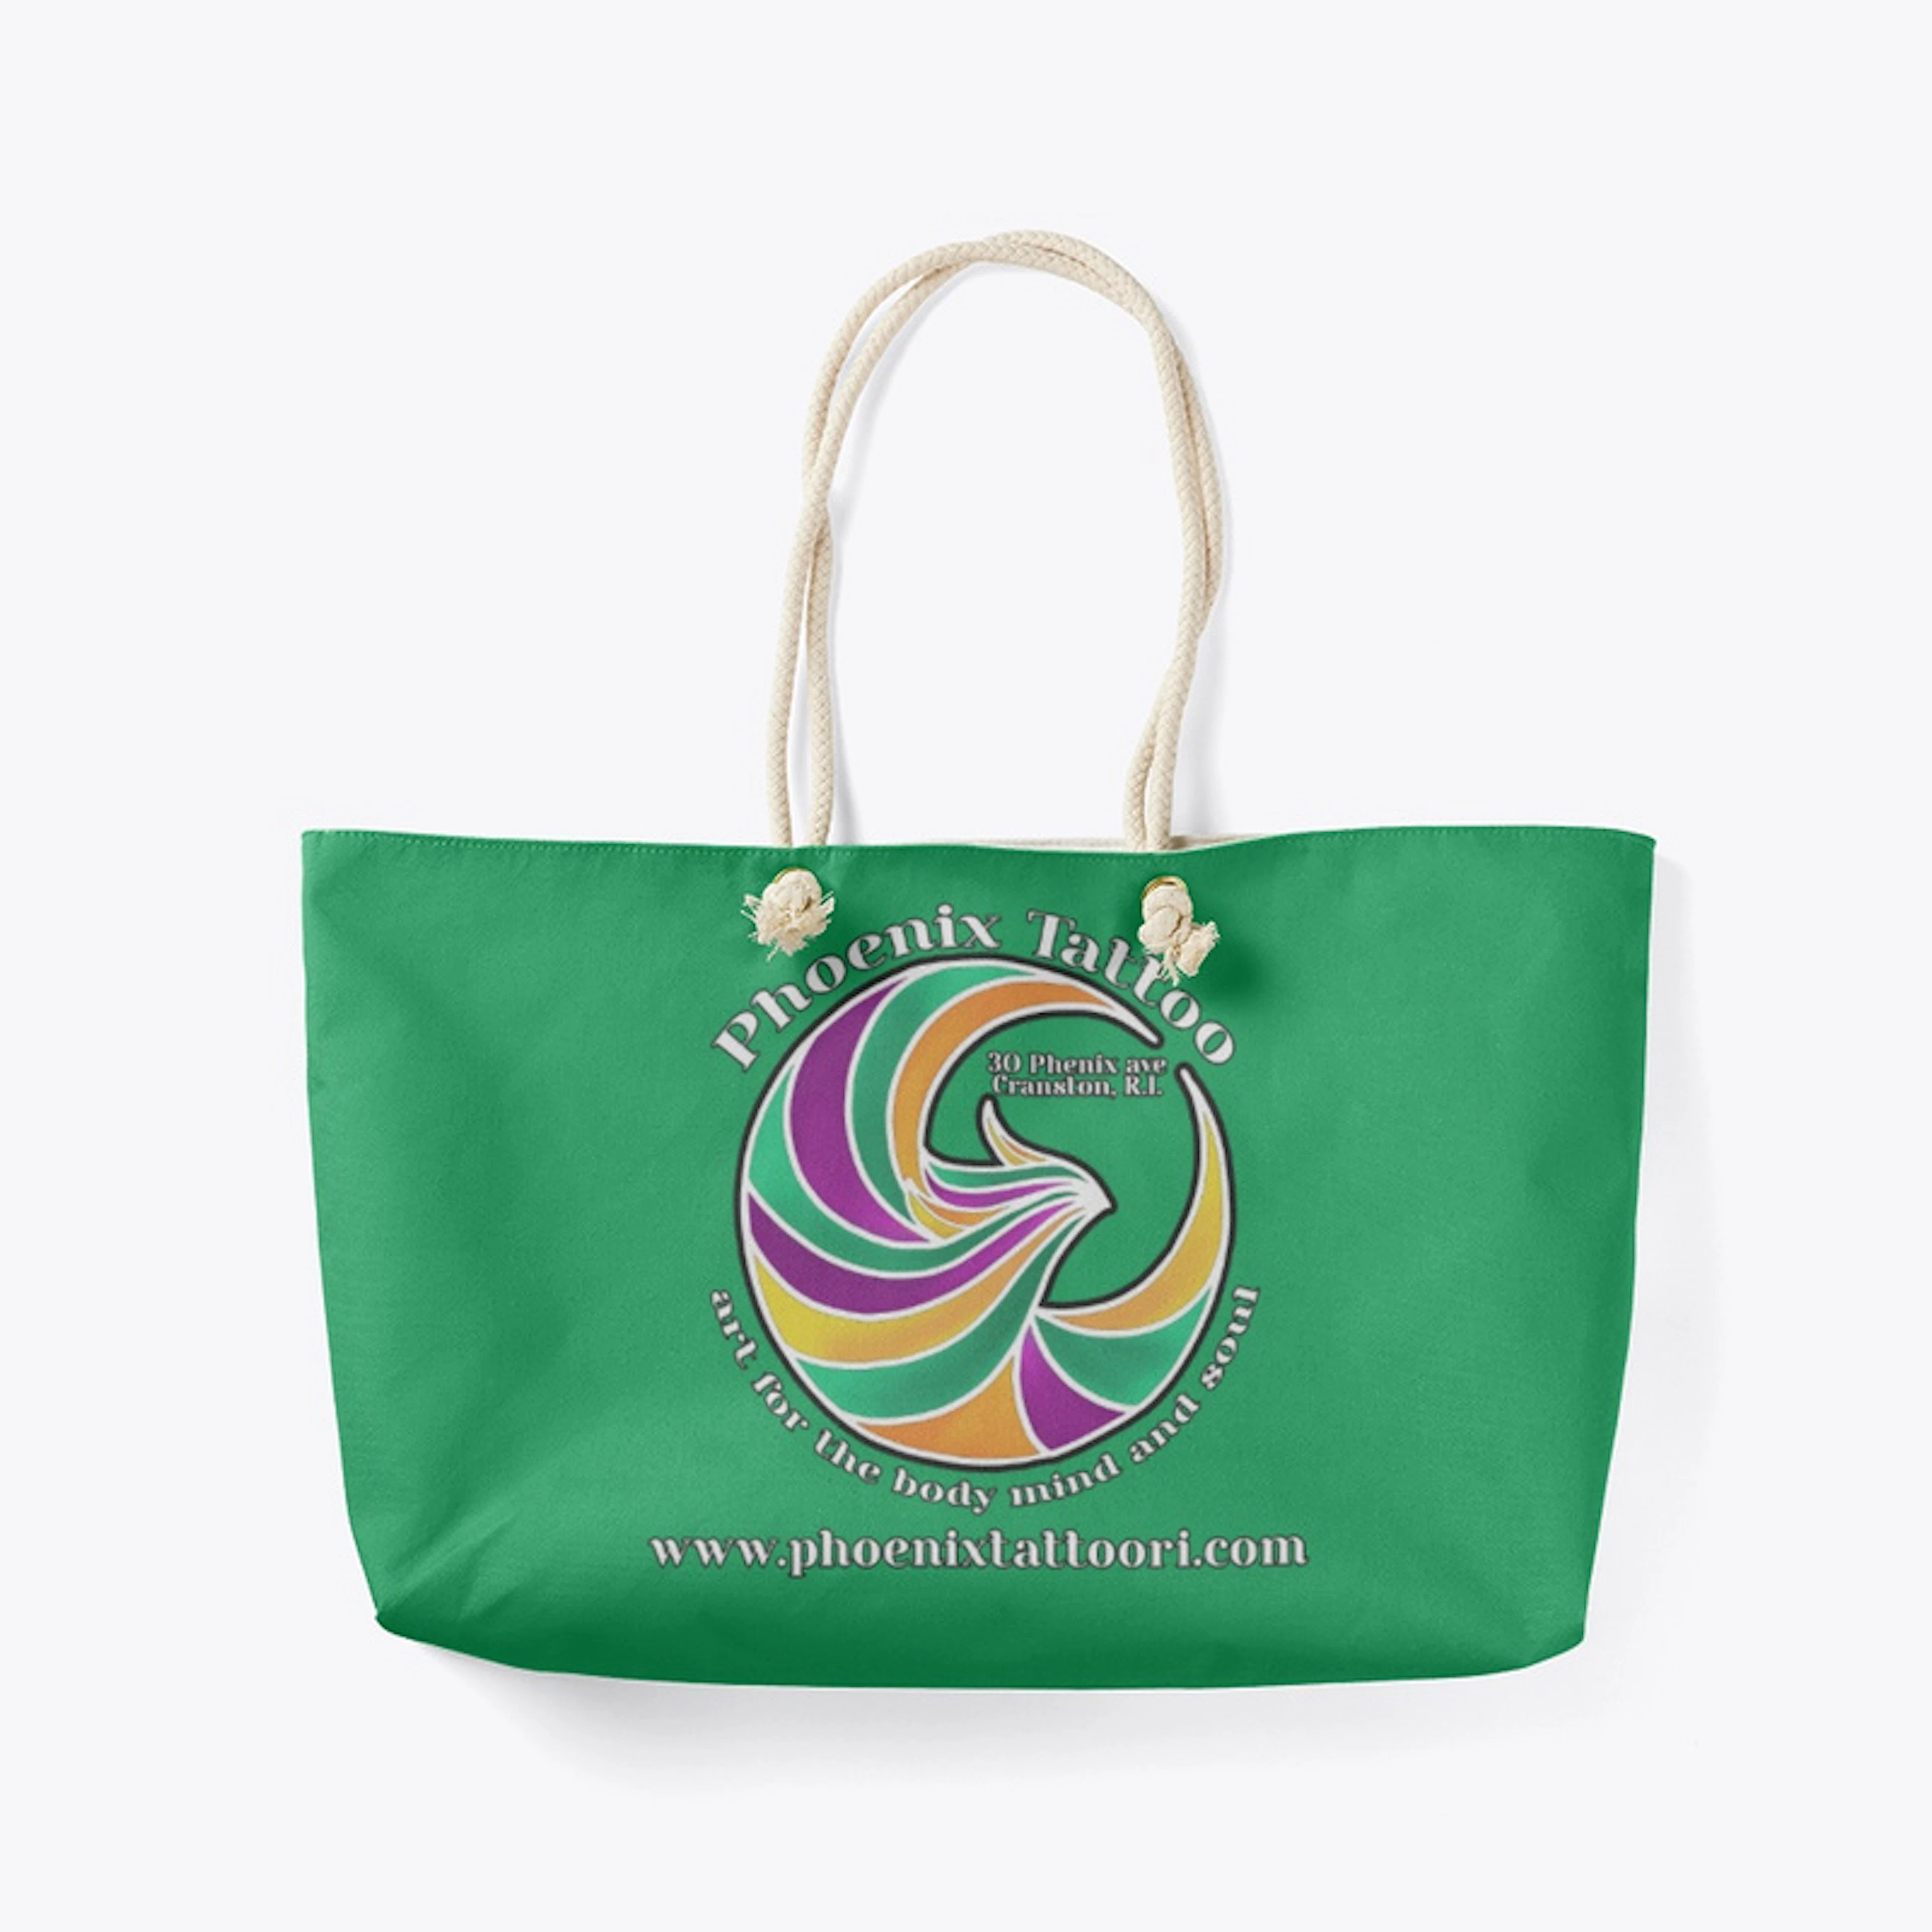 Totes and bags